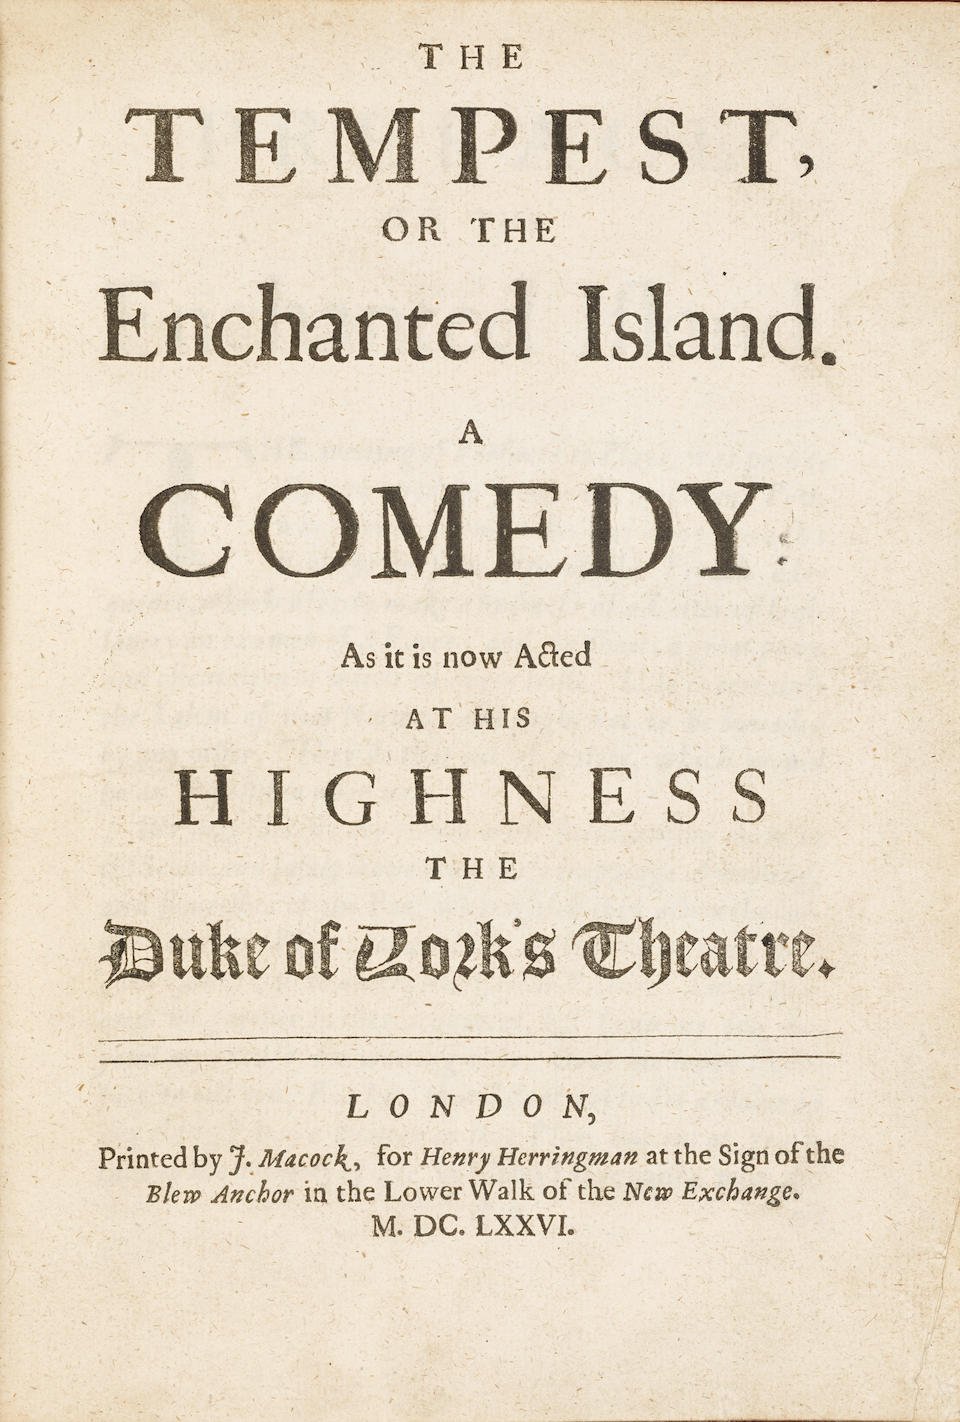 SHAKESPEARE, WILLIAM. 1654-1616. The&#8239;Tempest, or the Enchanted&#8239;Island. A comedy as it is now acted at His Highness the Duke of York's Theatre. Adapted by Sir William Davenant (1606-1668) and John Dryden (1631-1700). London: by J. Macock for Henry Herringman, 1676.